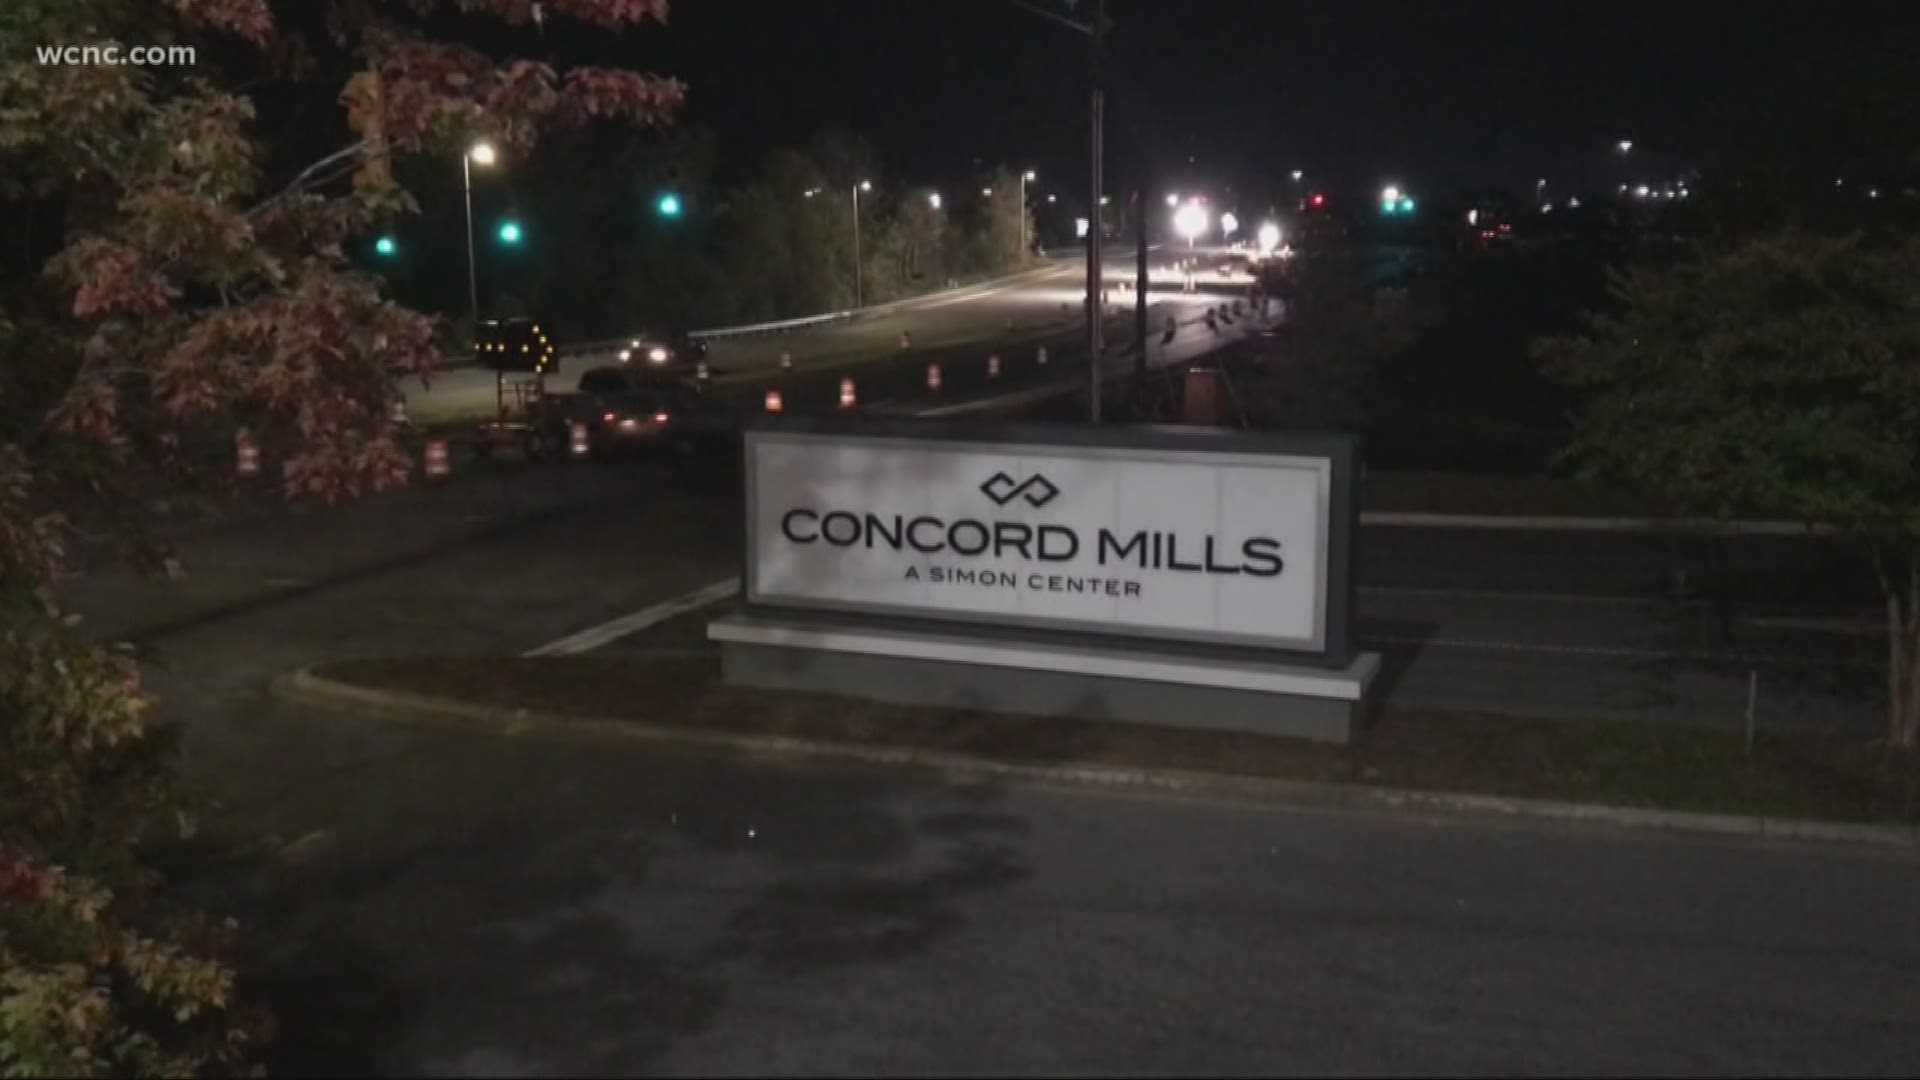 The plan is to build a new flyover bridge from Concord Mills Boulevard to help relieve some of the congestion.